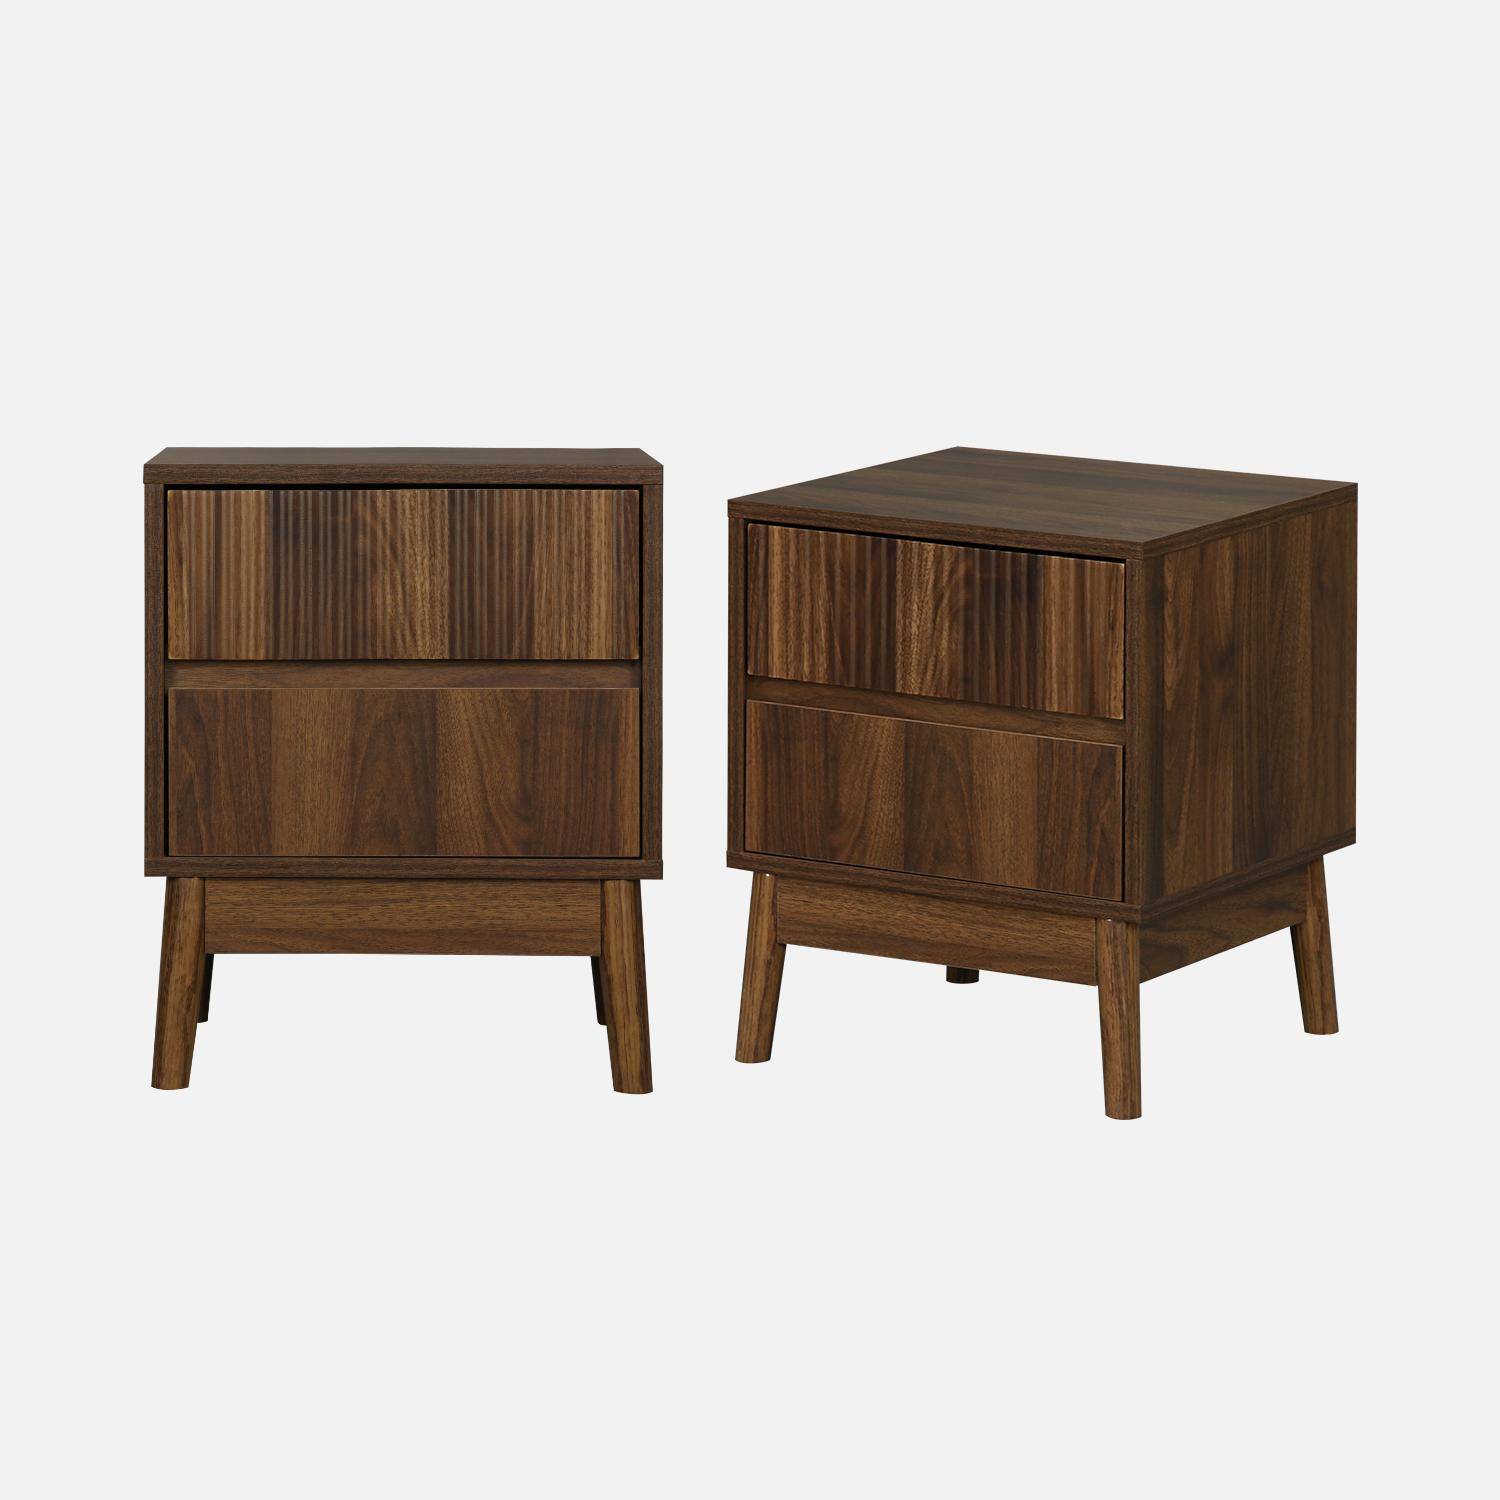 Pair of grooved wooden bedside tables with 2 drawers, 40x39x48cm - Linear - Dark Wood colour,sweeek,Photo4